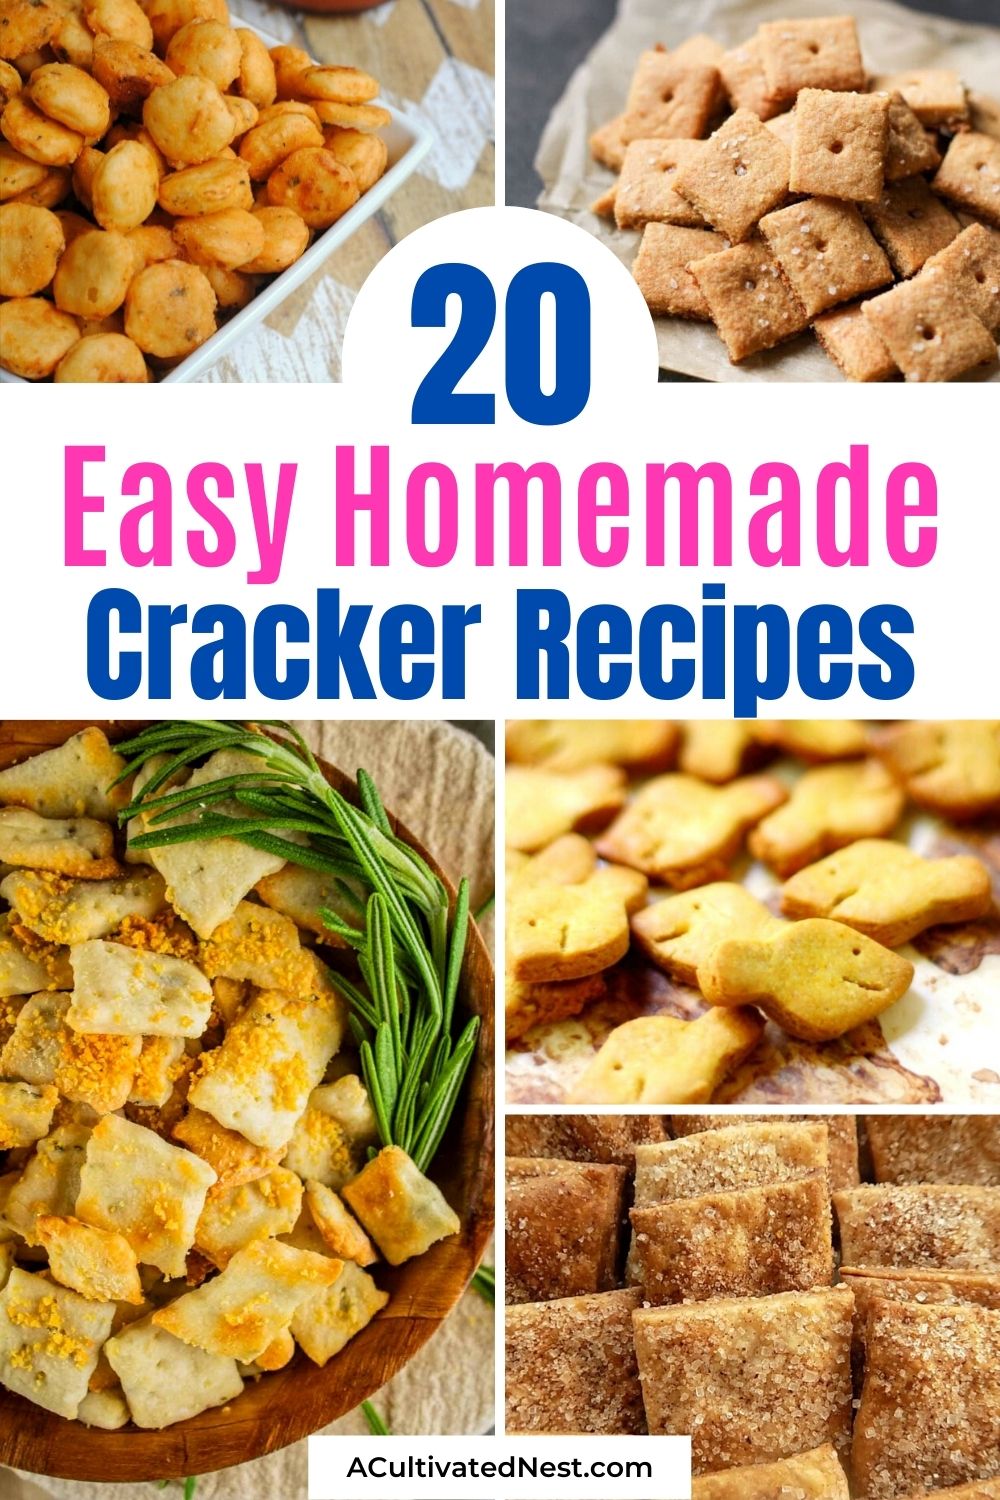 20 Easy Homemade Cracker Recipes- These easy homemade cracker recipes make wonderful snack as-is, or as additions to other appetizers! They're perfect for feeding a crowd! | #snackRecipes #crackers #homemadeCrackers #recipes #ACultivatedNest